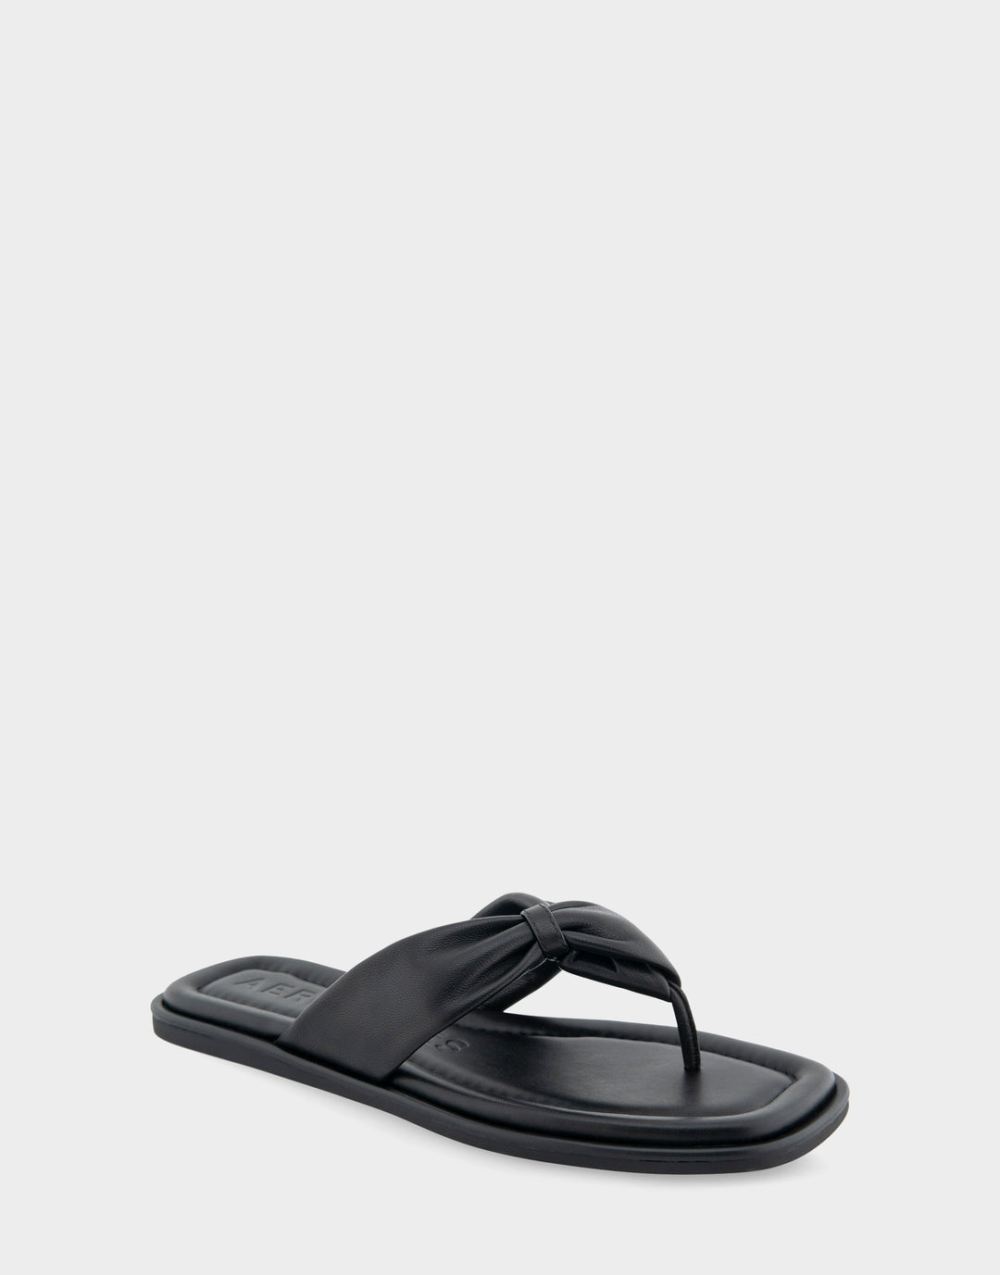 Women's | Bond Black Leather Knotted Thong Sandal